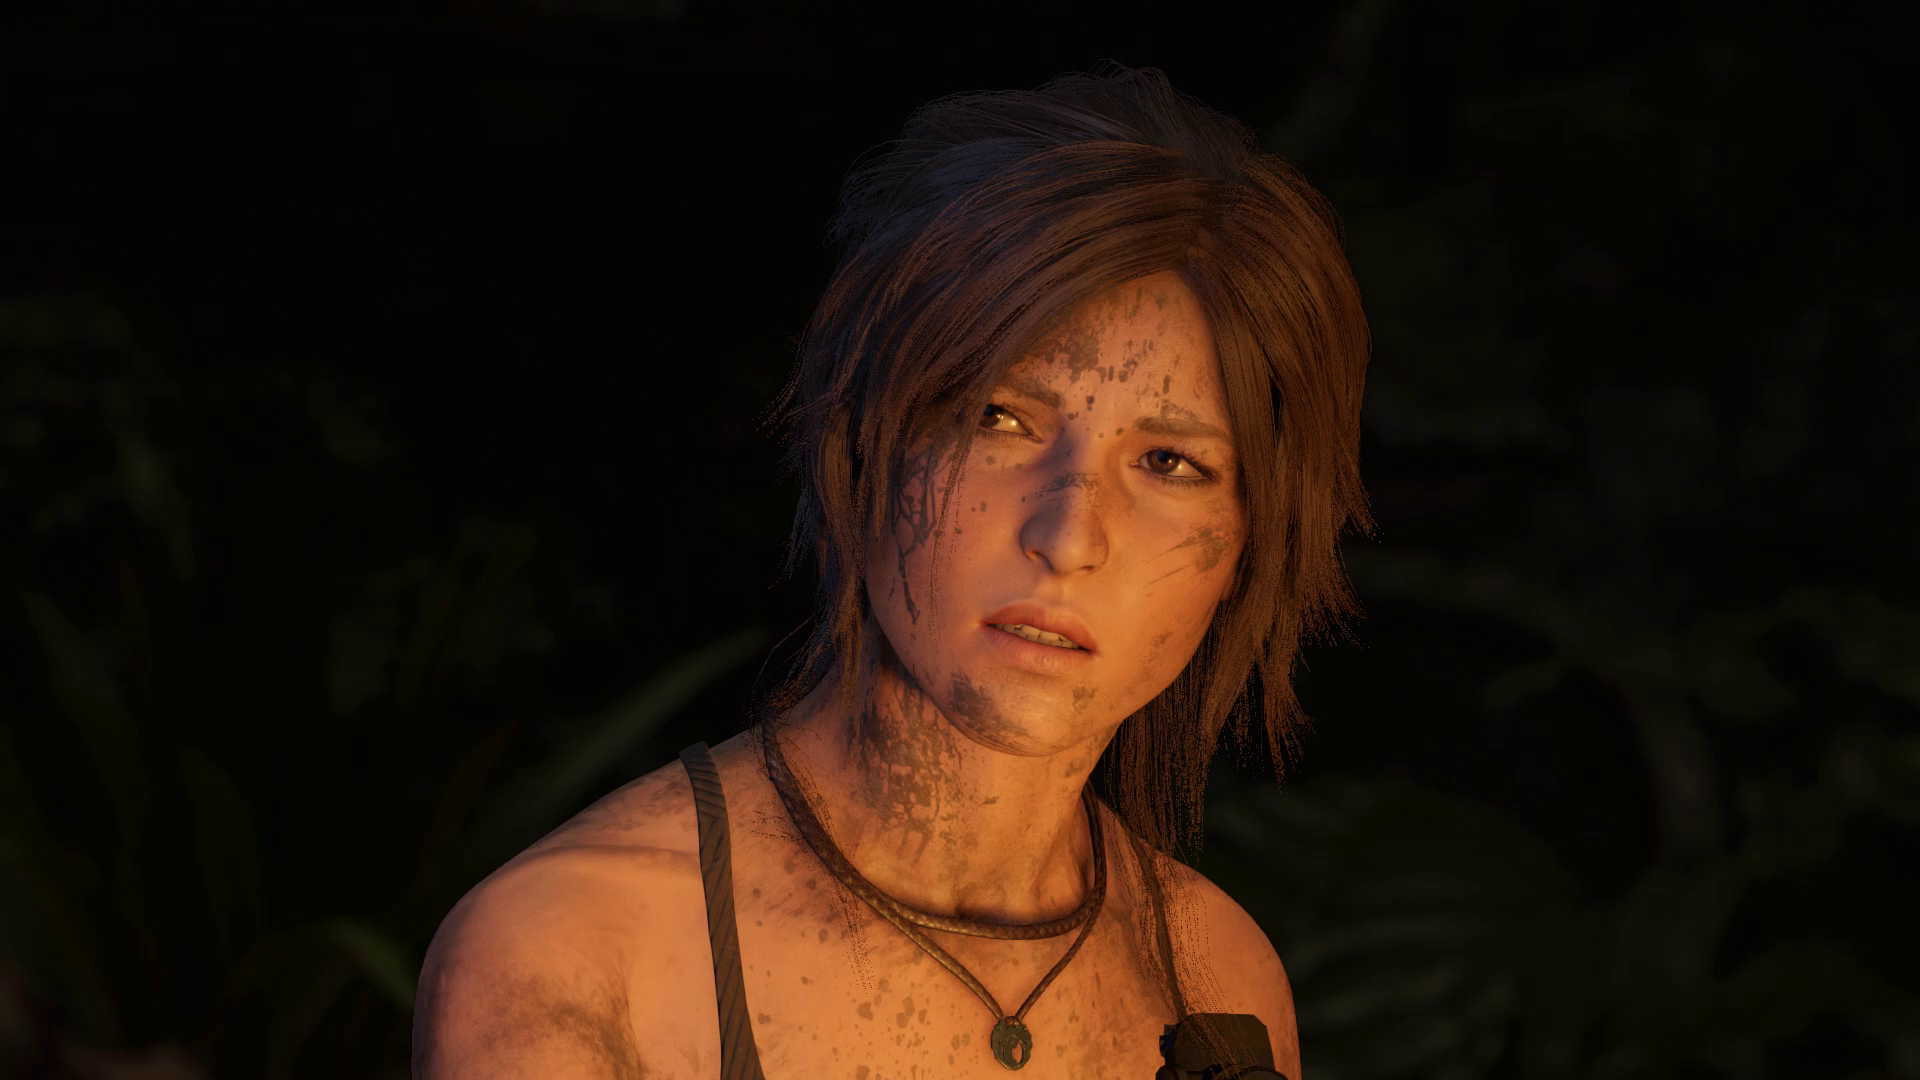 General 1920x1080 Shadow of the Tomb Raider Tomb Raider video games Lara Croft (Tomb Raider) screen shot PC gaming video game girls necklace face dirt video game characters